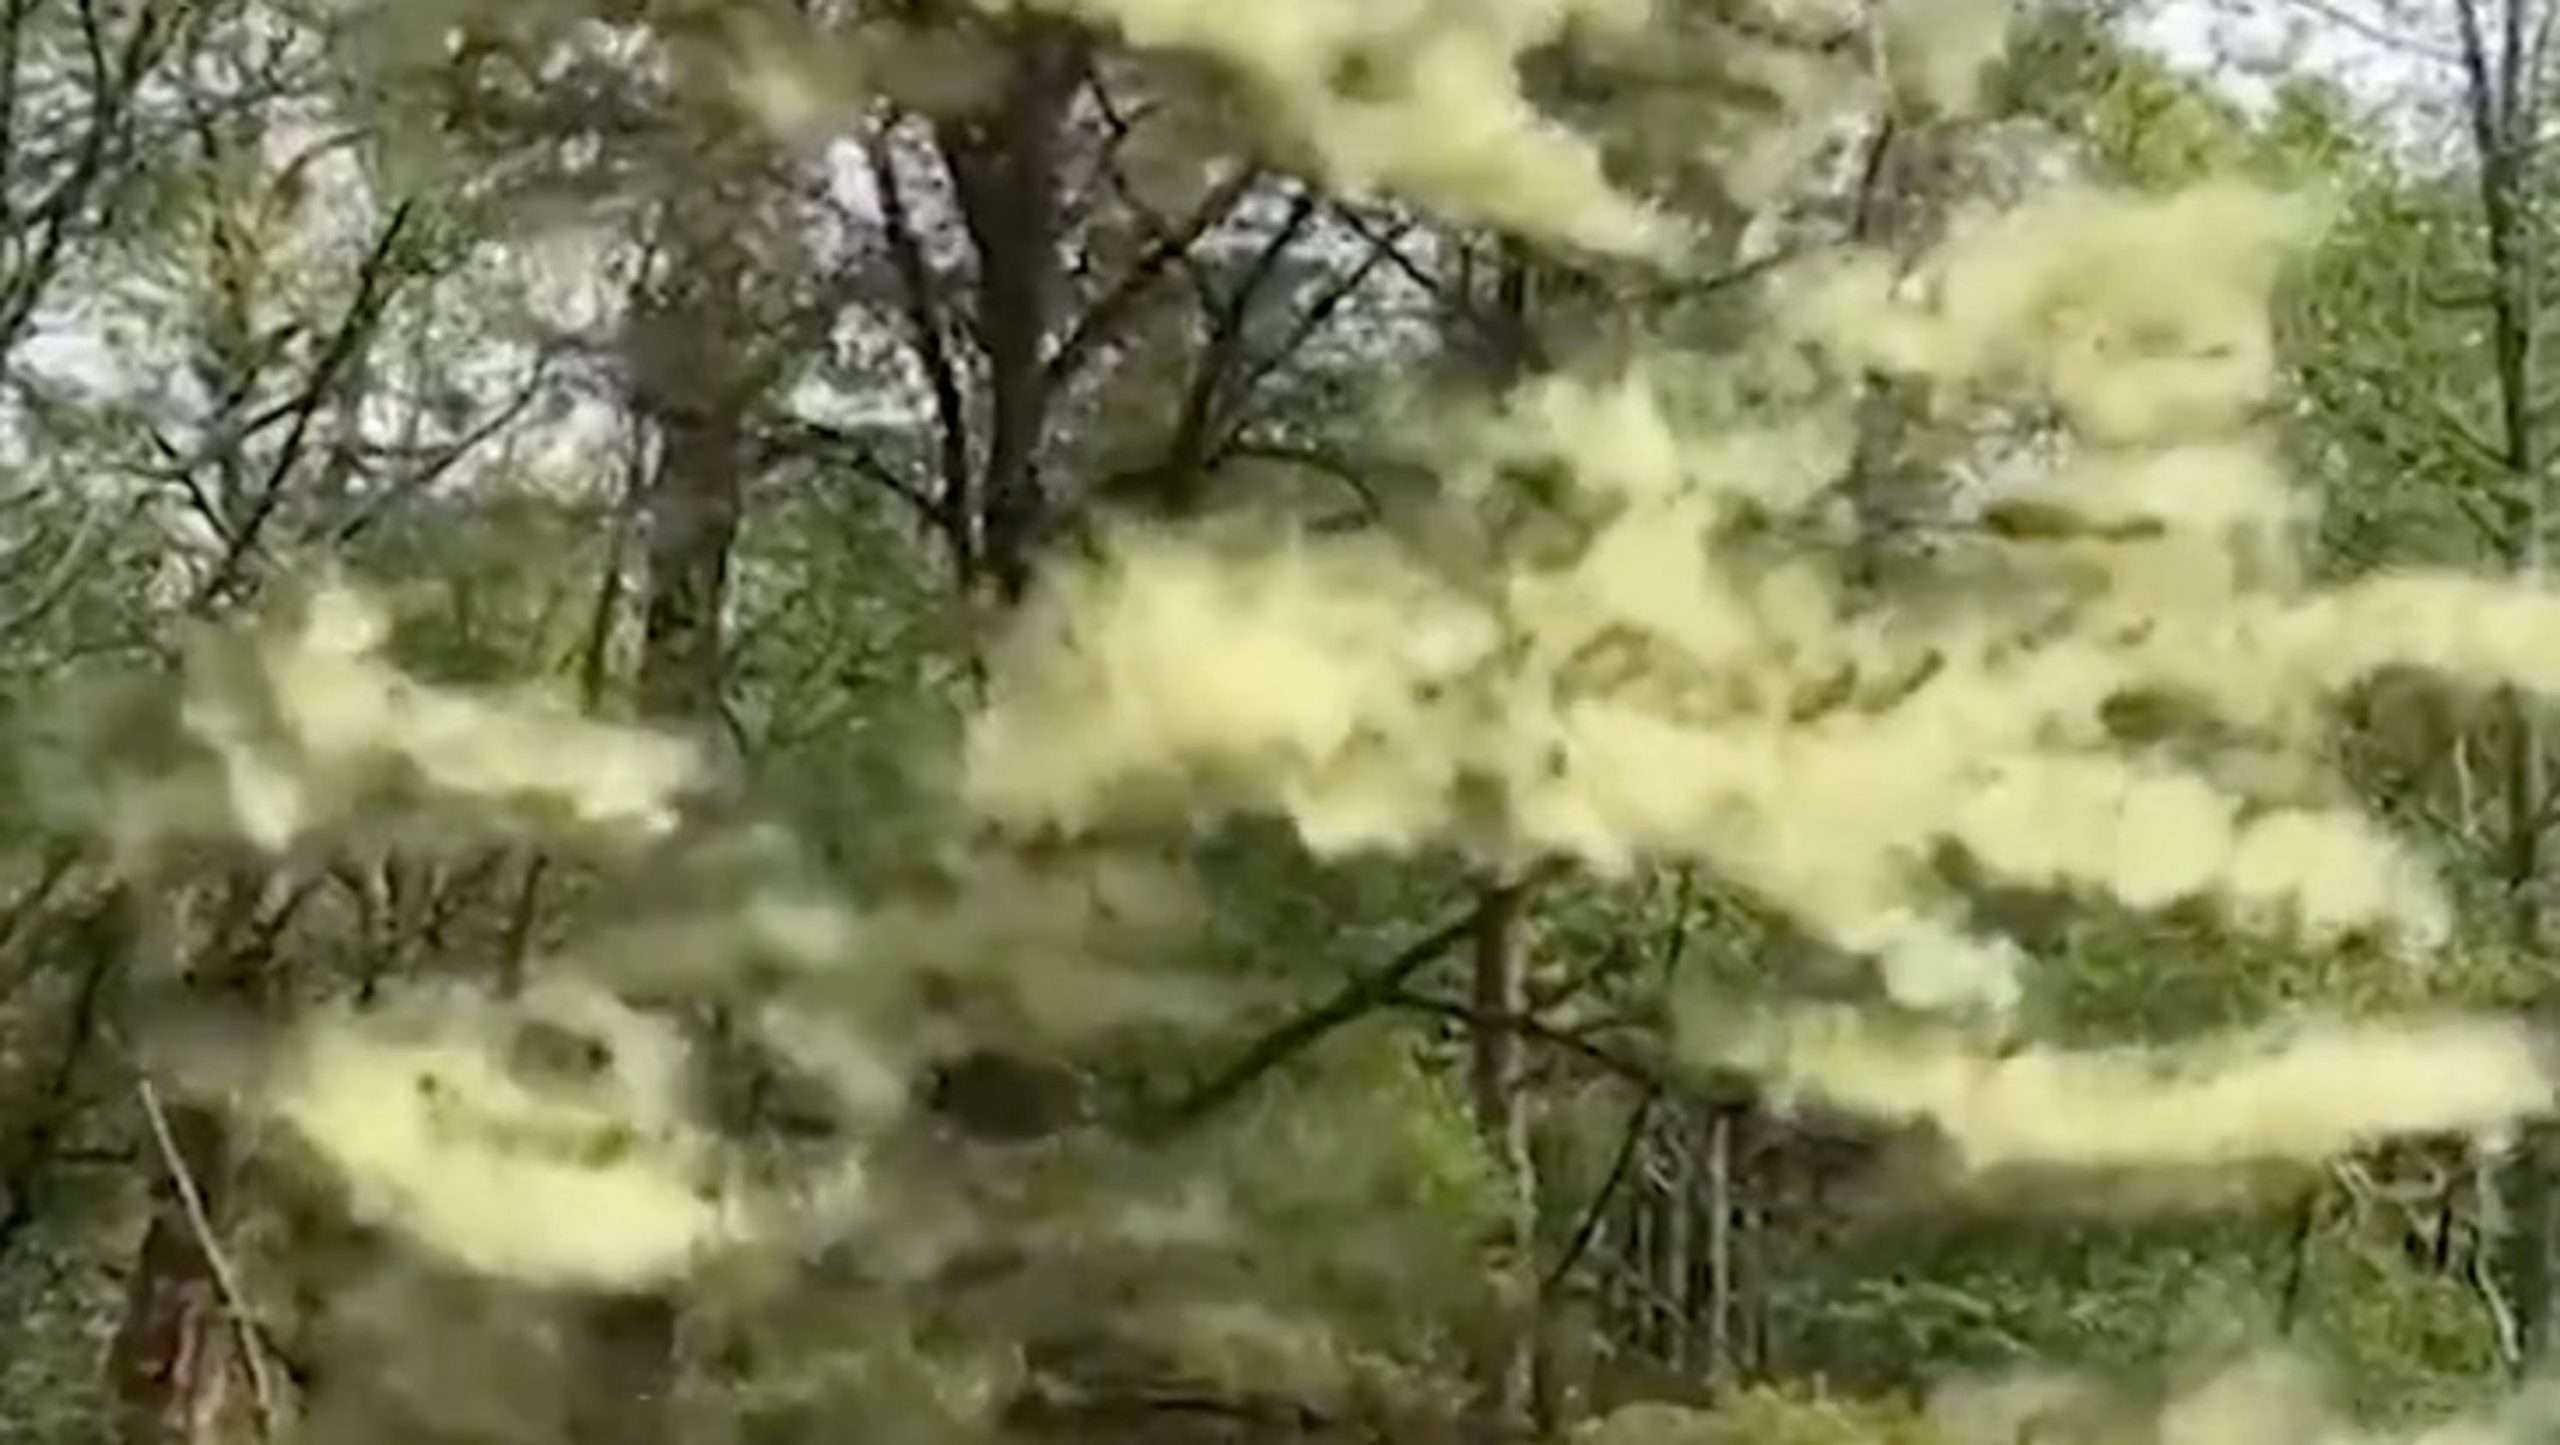 This massive pollen cloud in New Jersey reminds us its allergy season